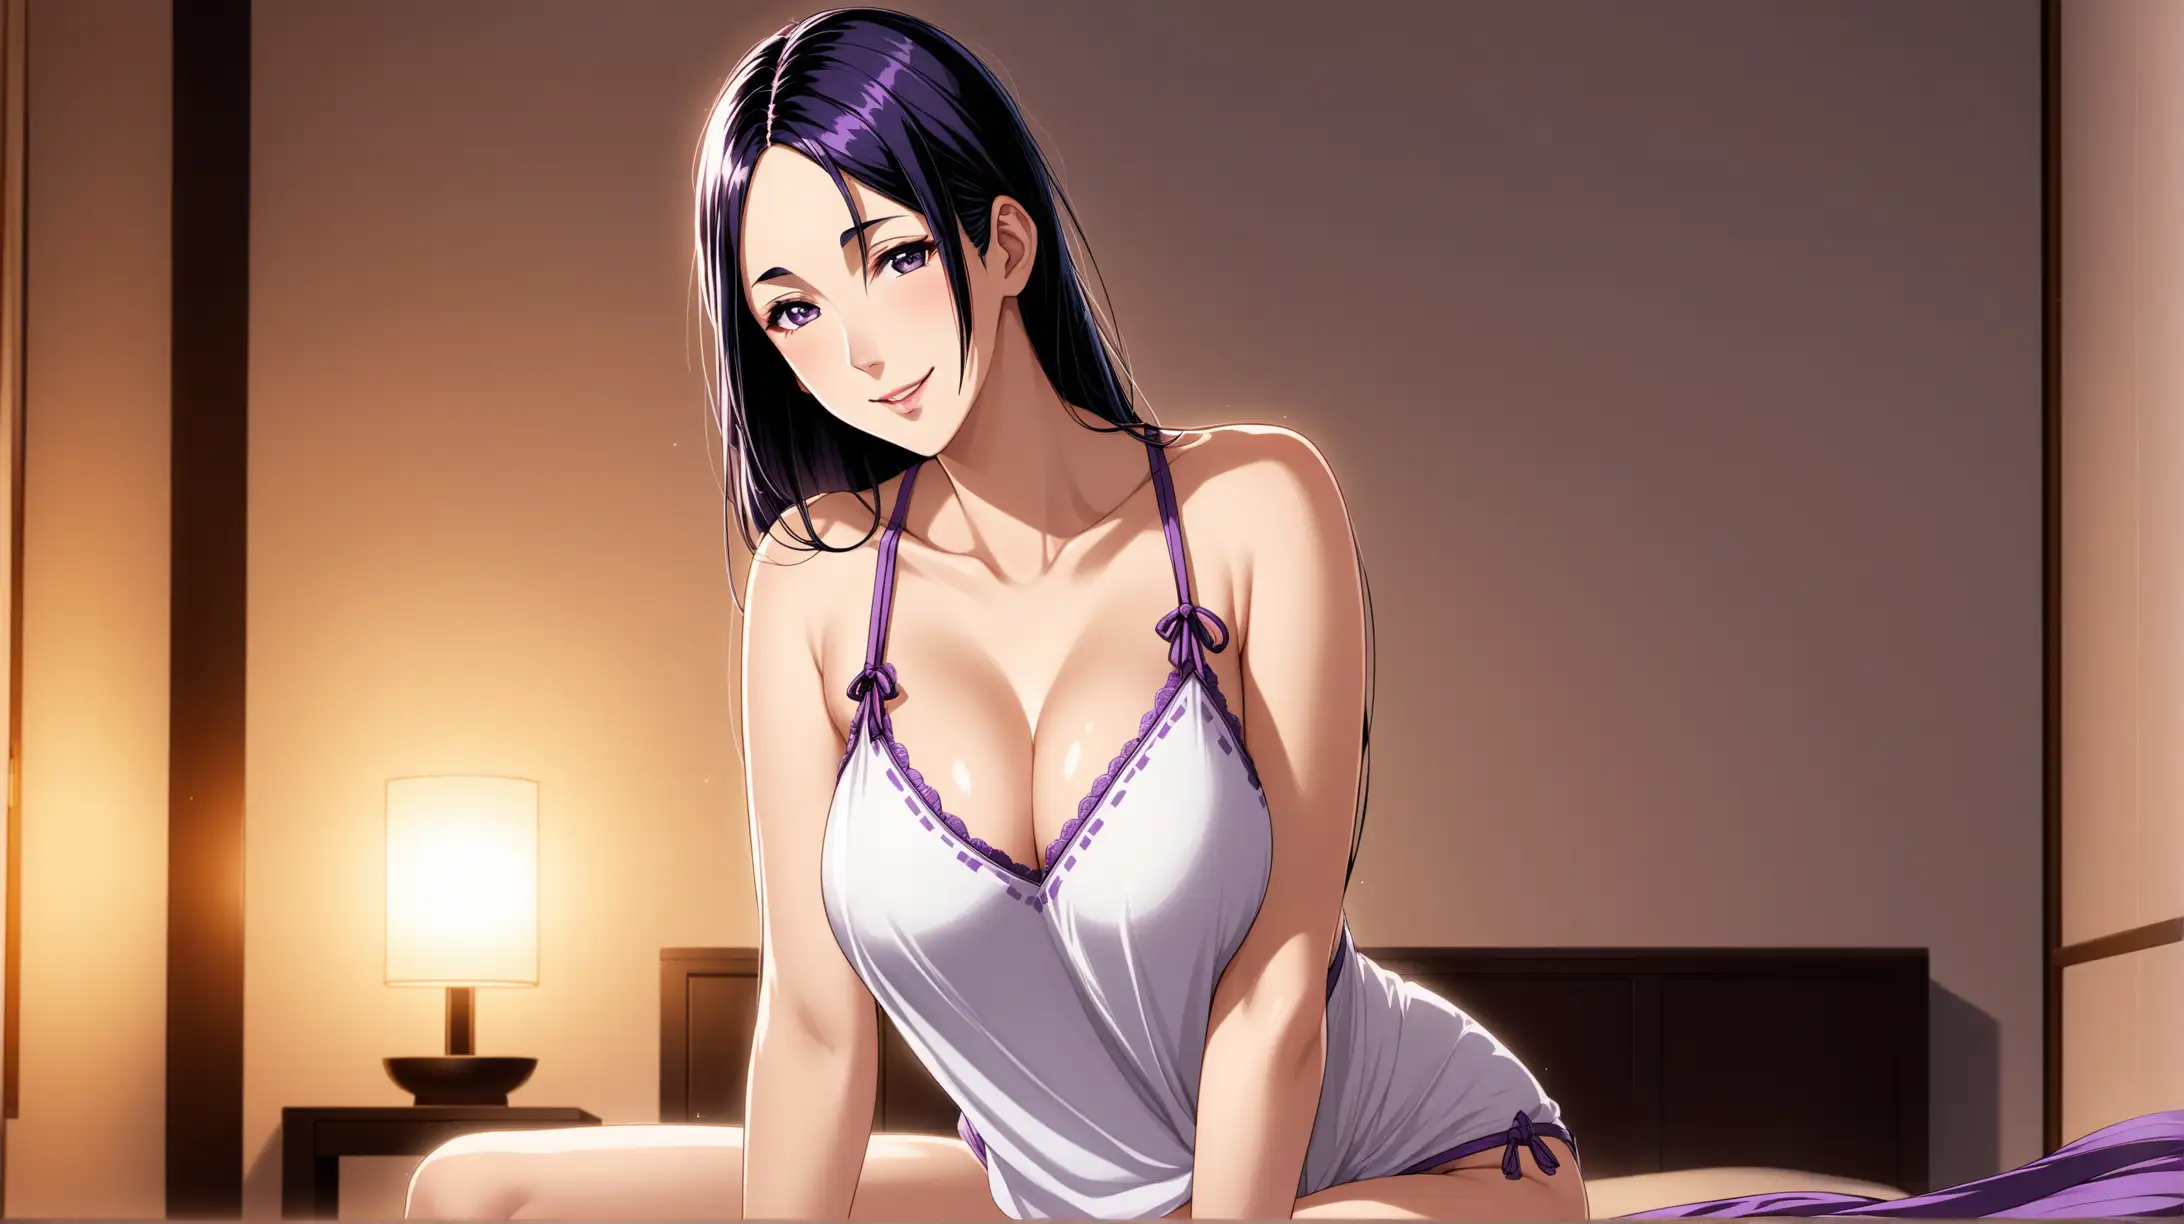 Draw the character Minamoto no Raikou, high quality, ambient lighting, long shot, indoors, in a seductive pose, wearing a low-cut white camisole, smiling at the viewer